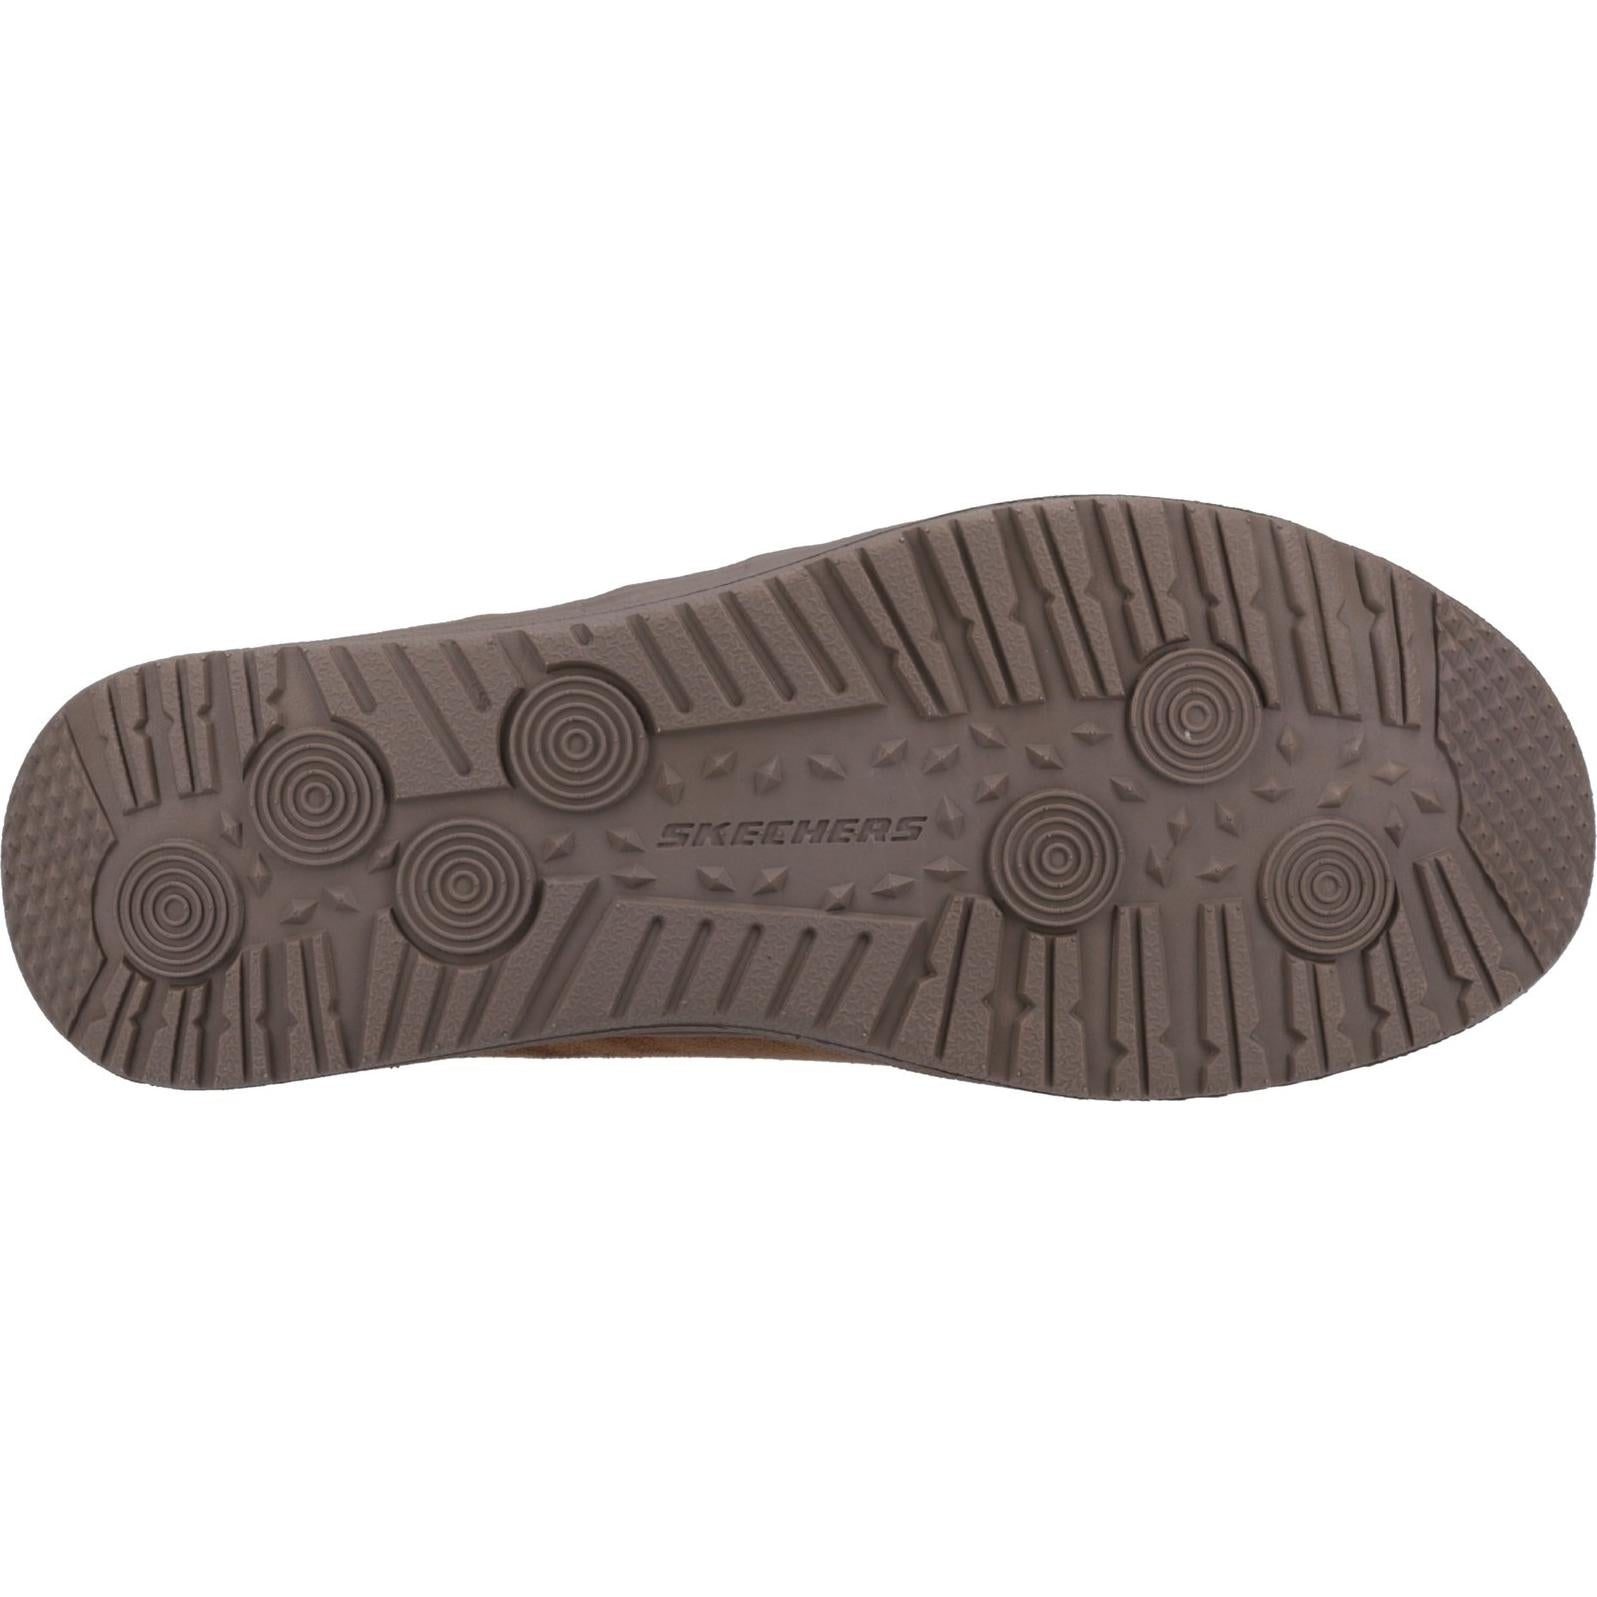 Skechers Relaxed Fit: Melson - Harmen Clog Slippers